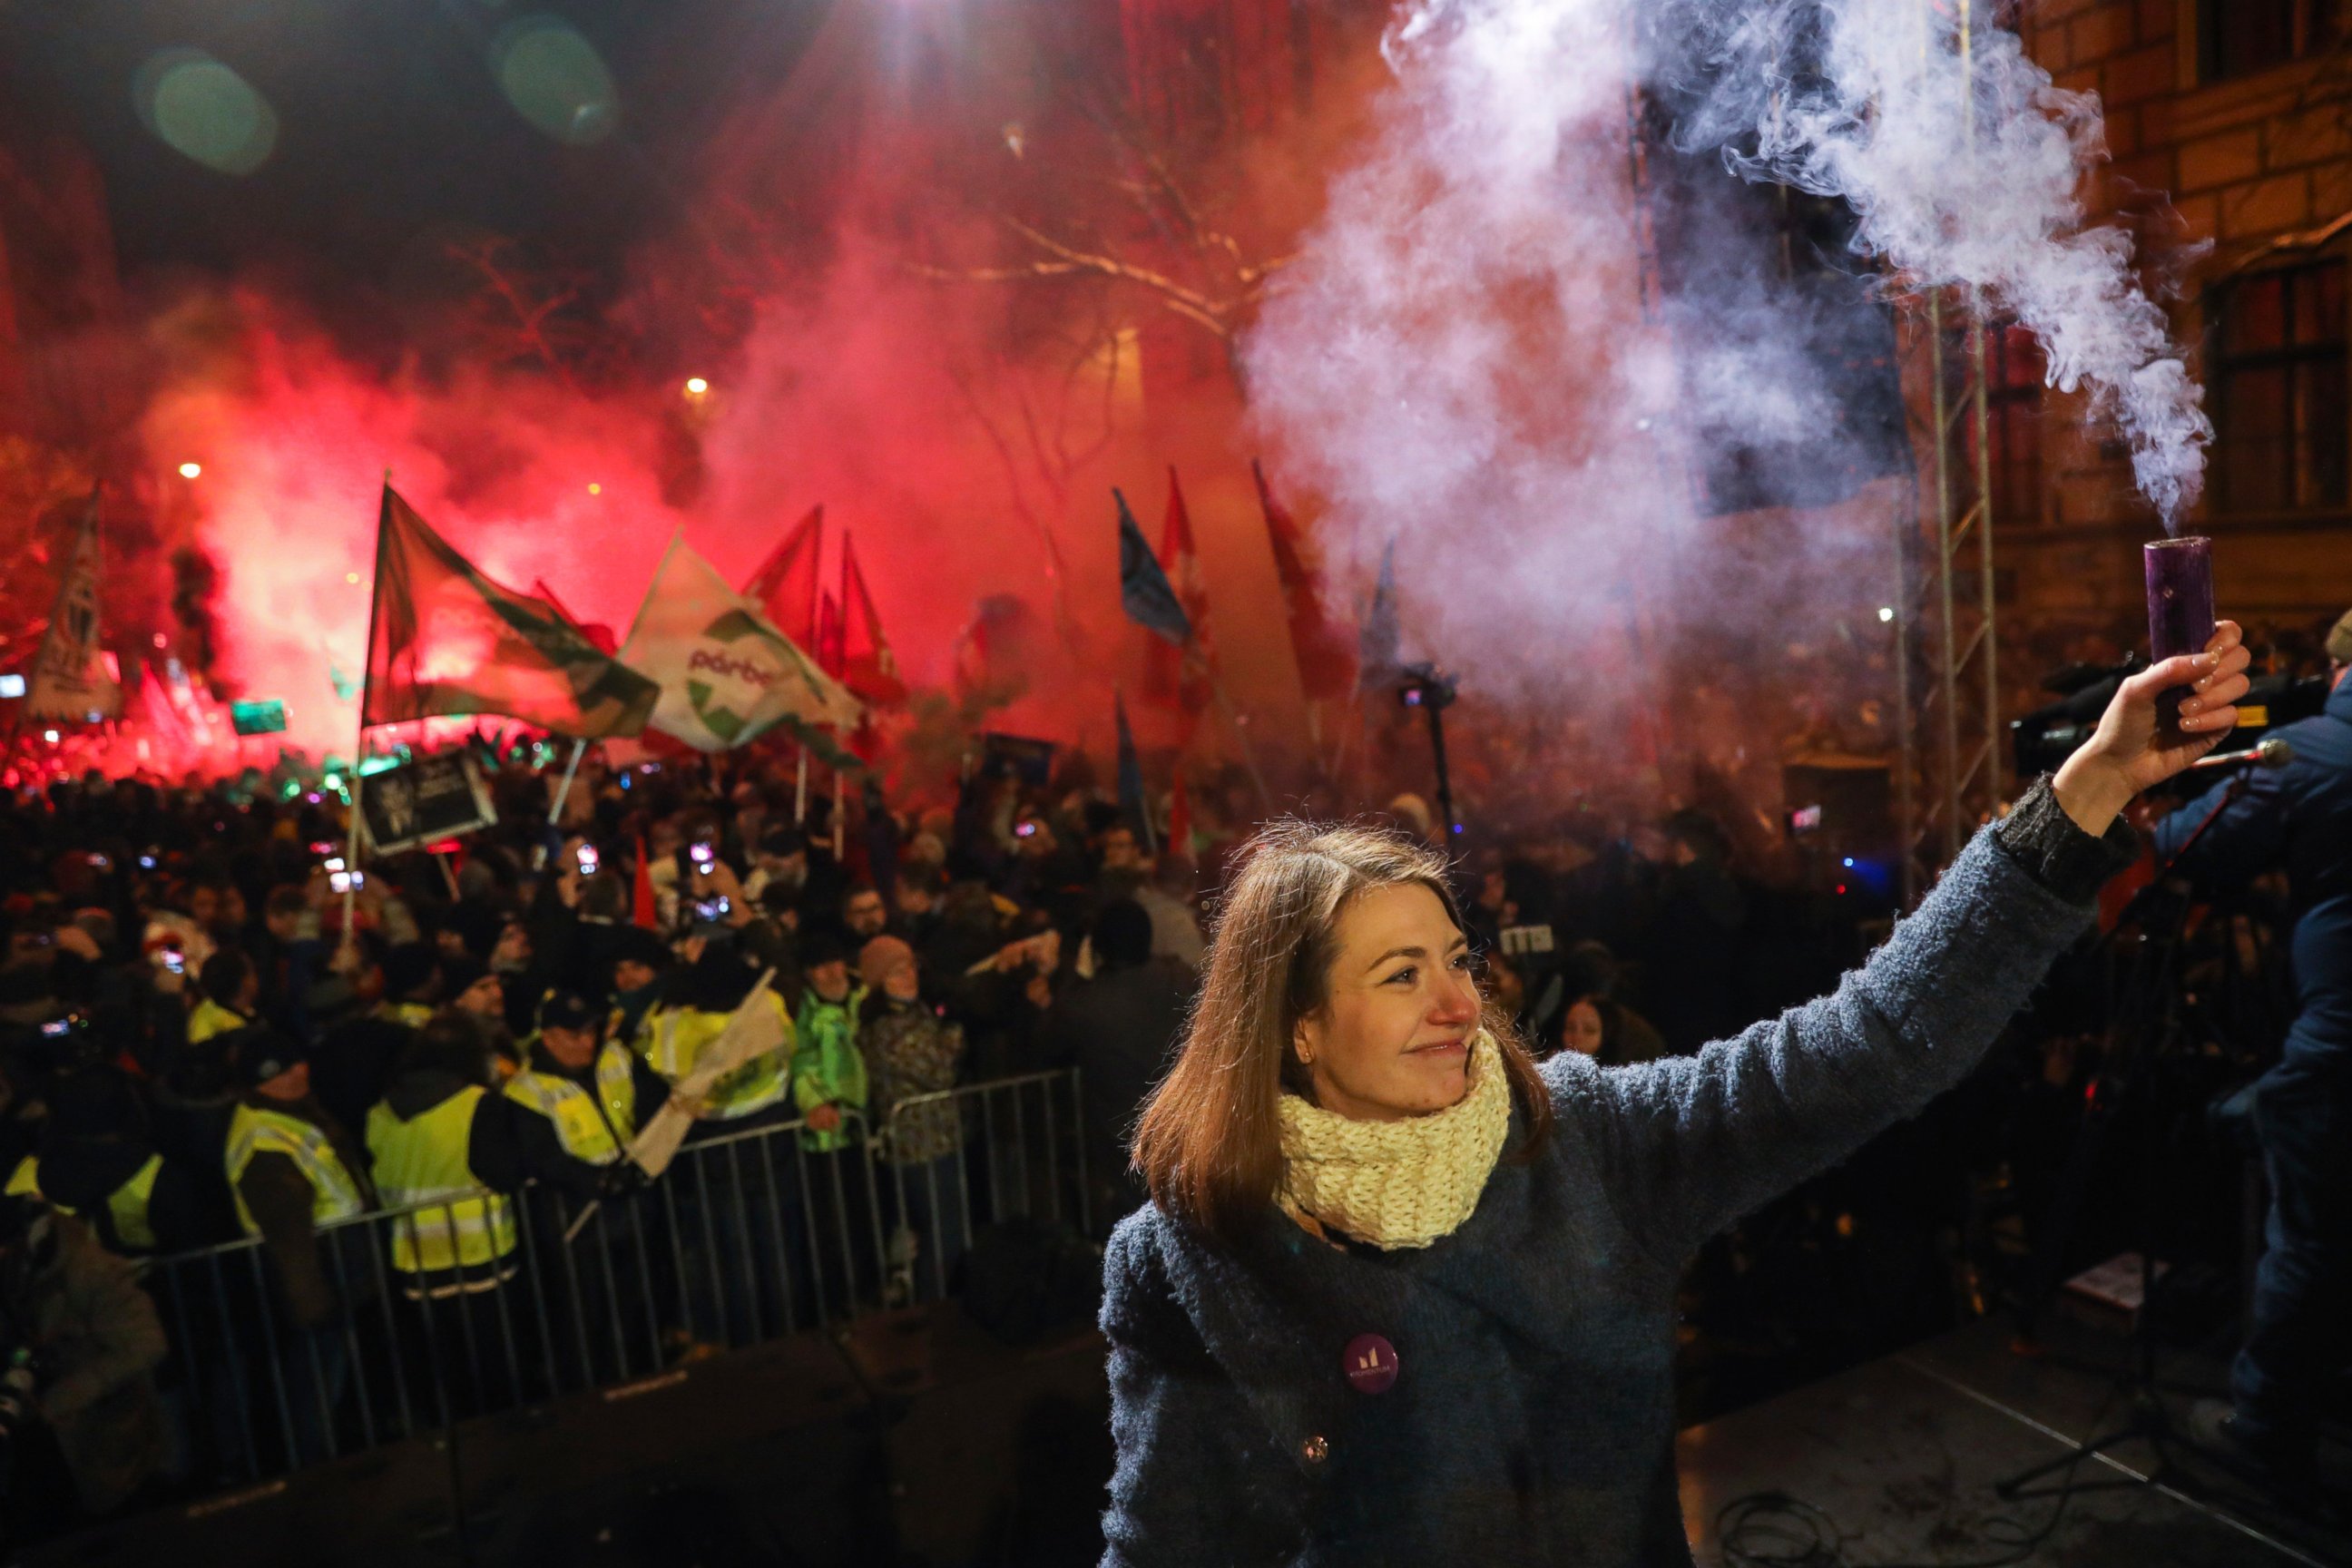 Vice-chairperson of Momentum party Anna Donath holds up a smoke grenade during an anti-government protest in the downtown of Budapest, Hungary, Sunday, Dec. 16, 2018. (Balazs Mohai/MTI via AP)